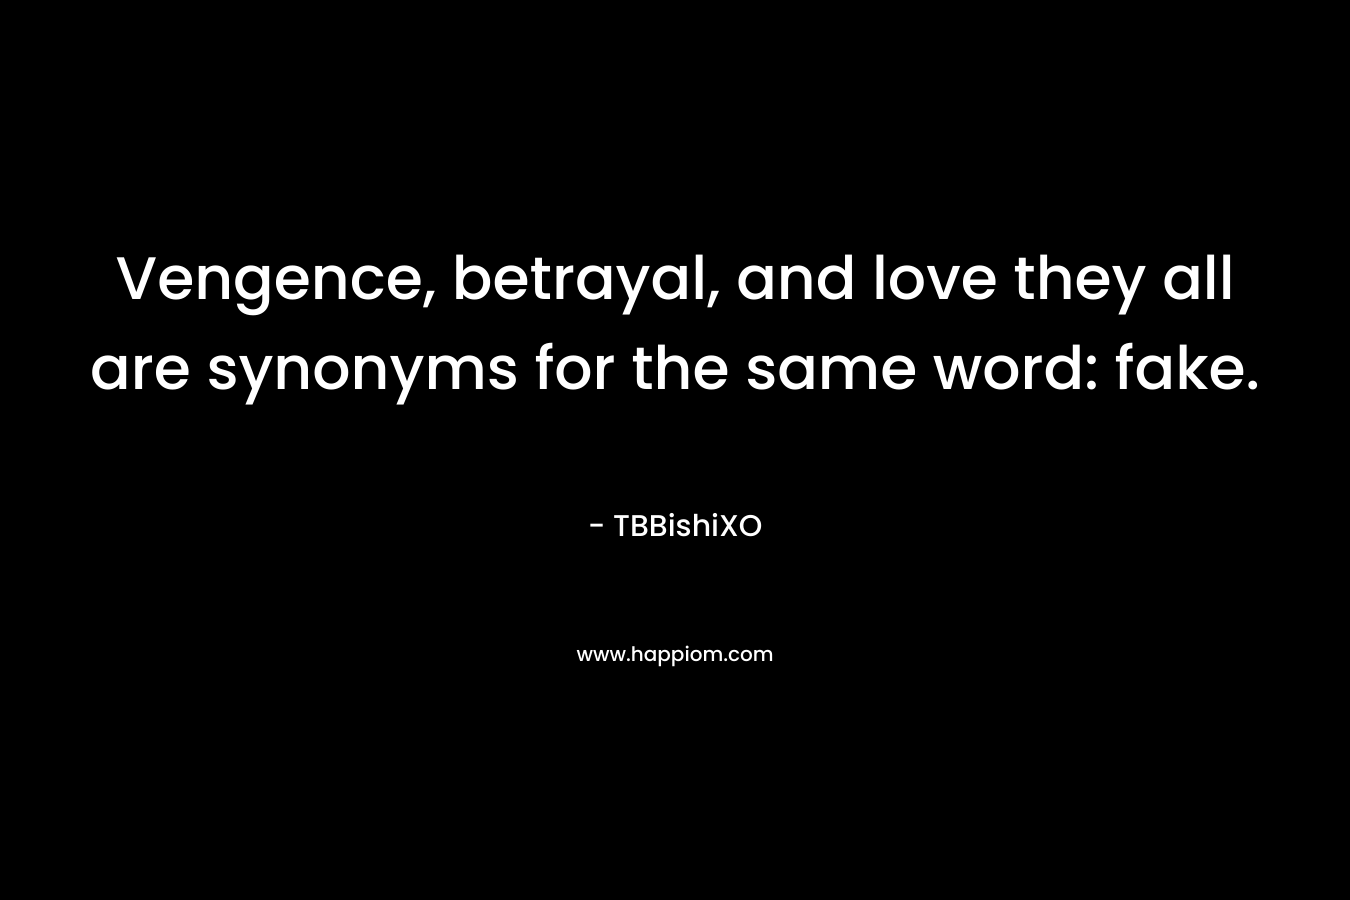 Vengence, betrayal, and love they all are synonyms for the same word: fake. – TBBishiXO